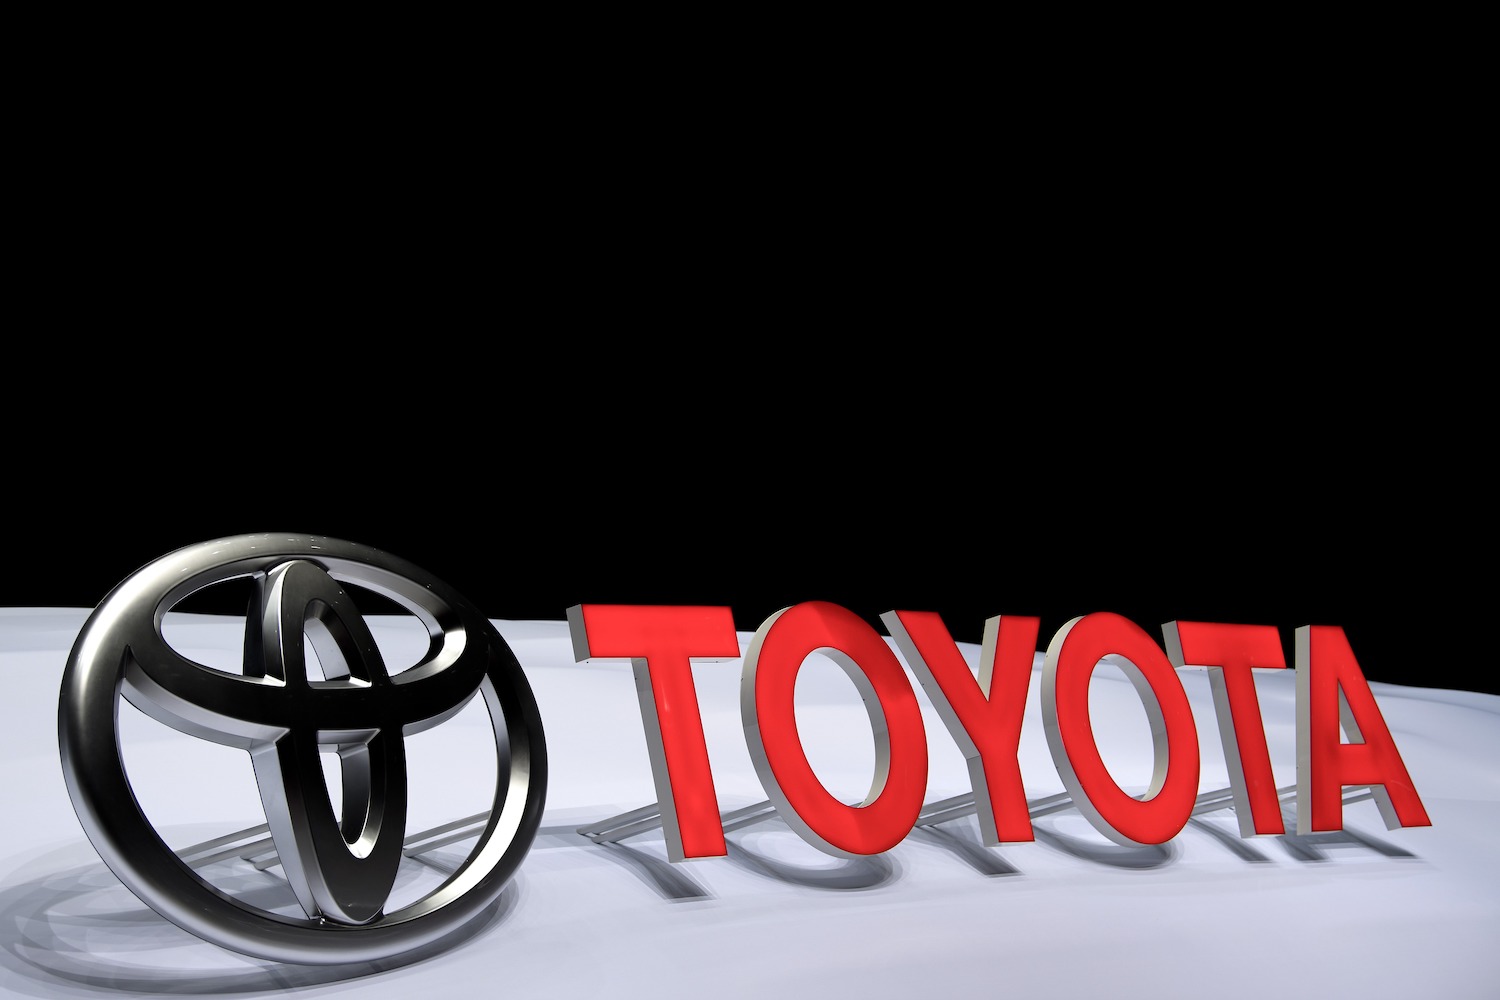 Toyota logo and the word Toyota on a white stage, with their shadows visible in the background.